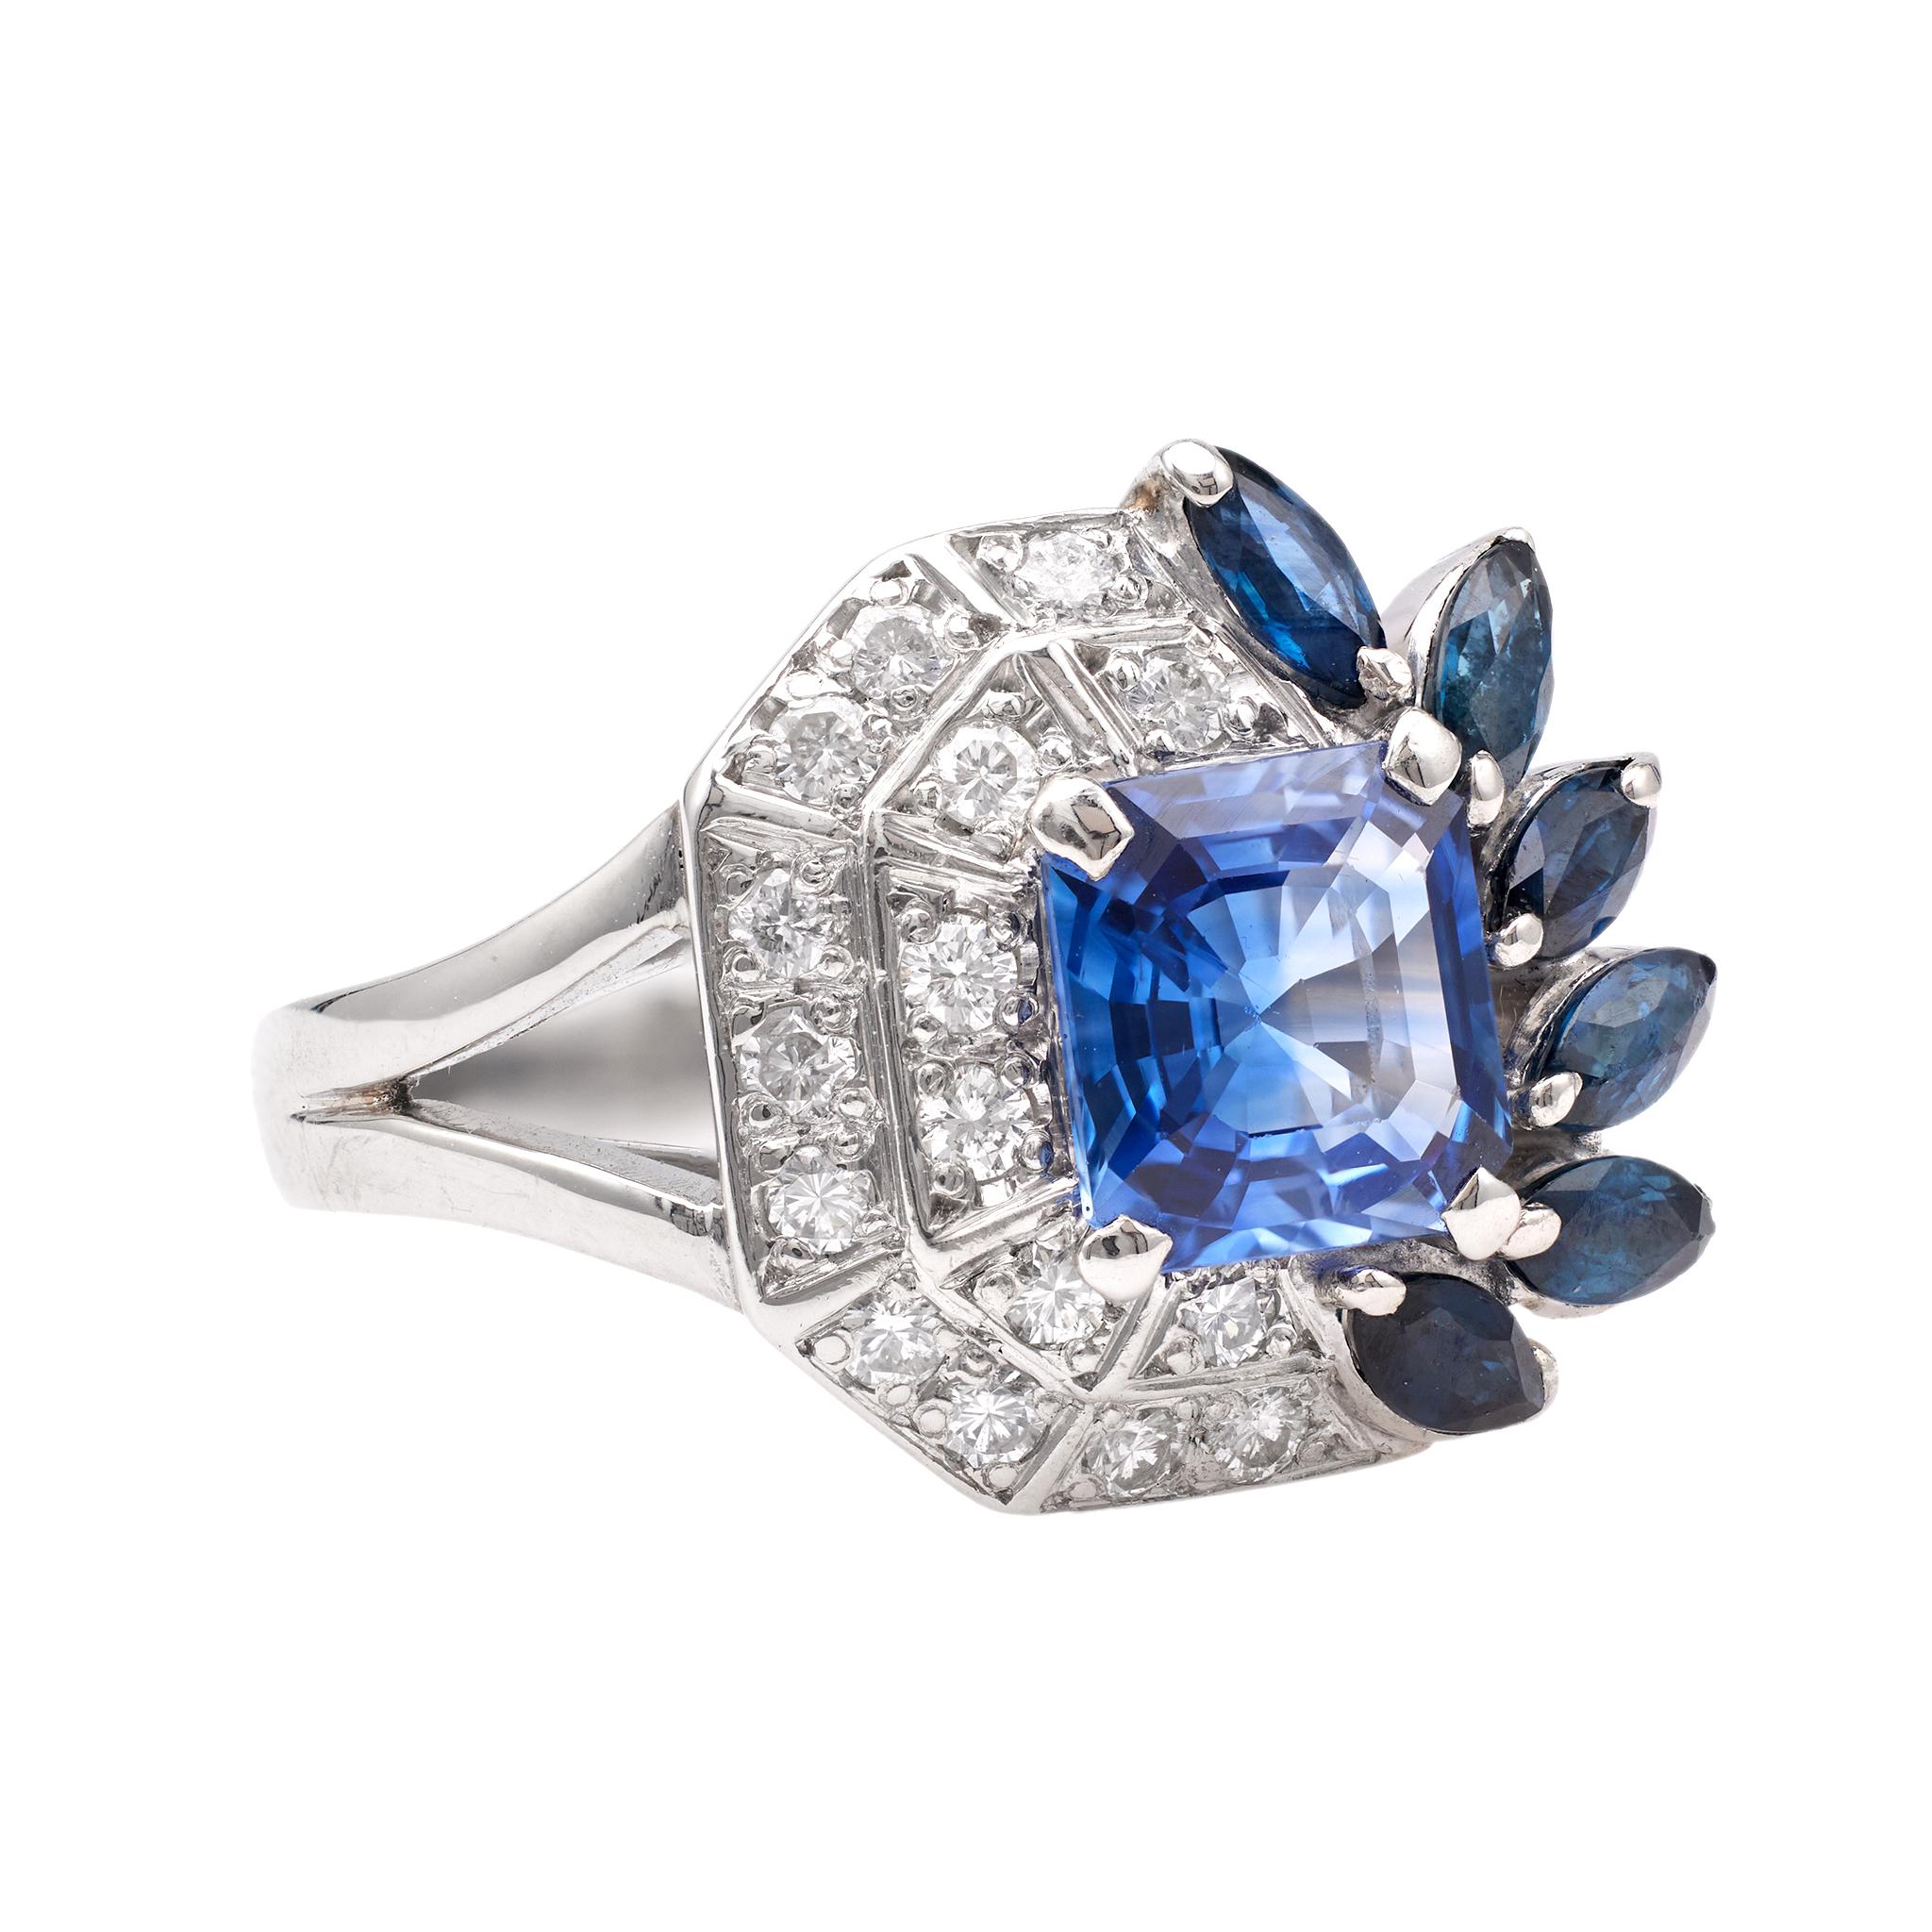 One Mid-Century GIA Madagascan No Heat Sapphire Diamond Platinum Ring. Featuring one square mixed cut sapphire weighing approximately 1.65 carats, accompanied by GIA #2231178008 stating the sapphire is of Madagascan origin and has no indications of